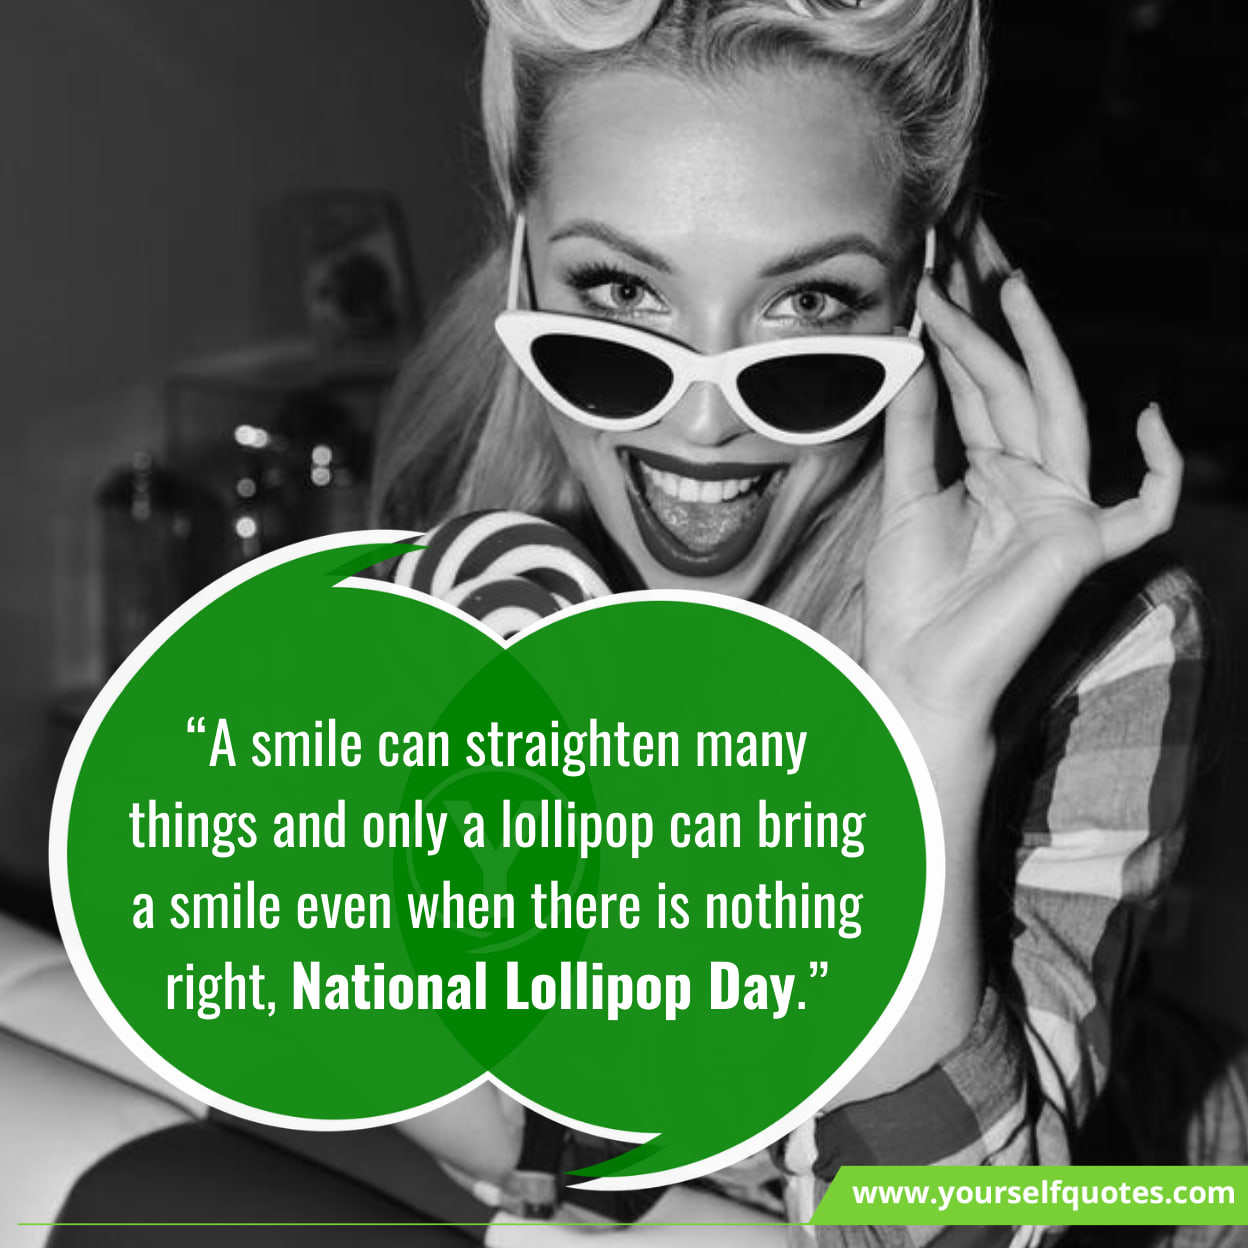 Happy National Lollipop Day Wishes